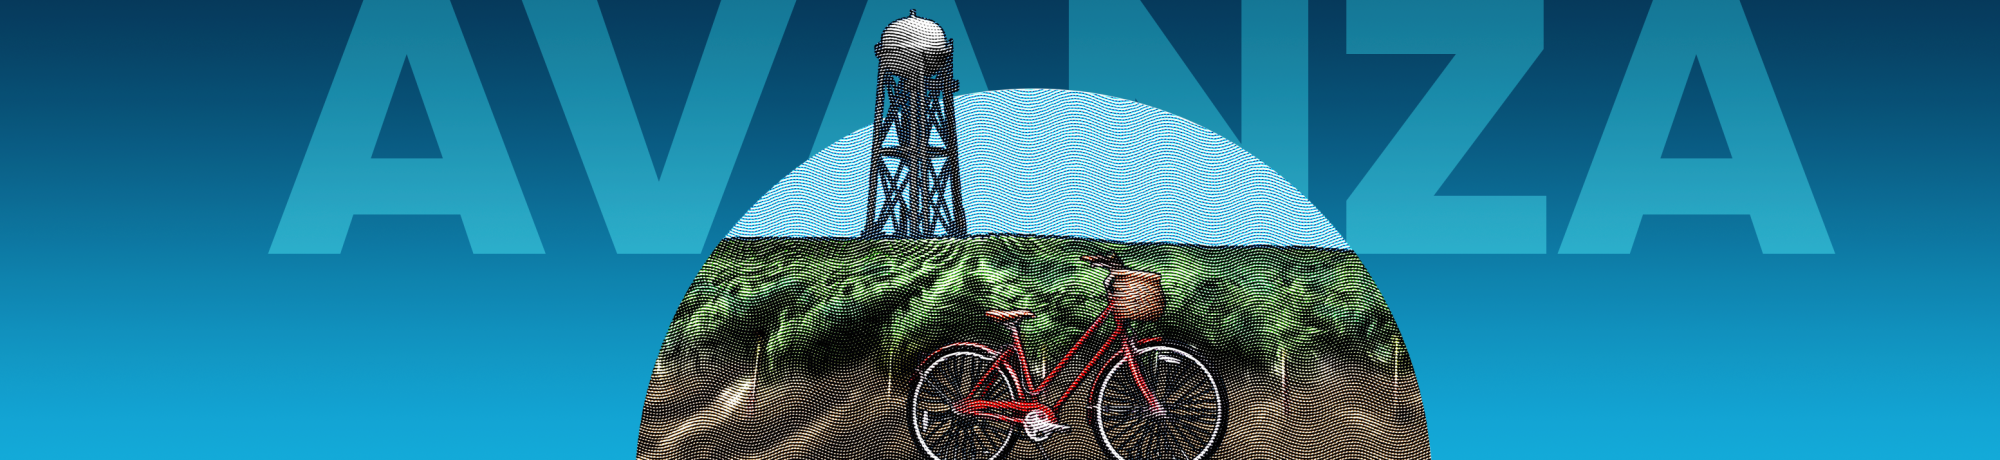 An illustration of a red bike parked in a vineyard with a water tower in the background